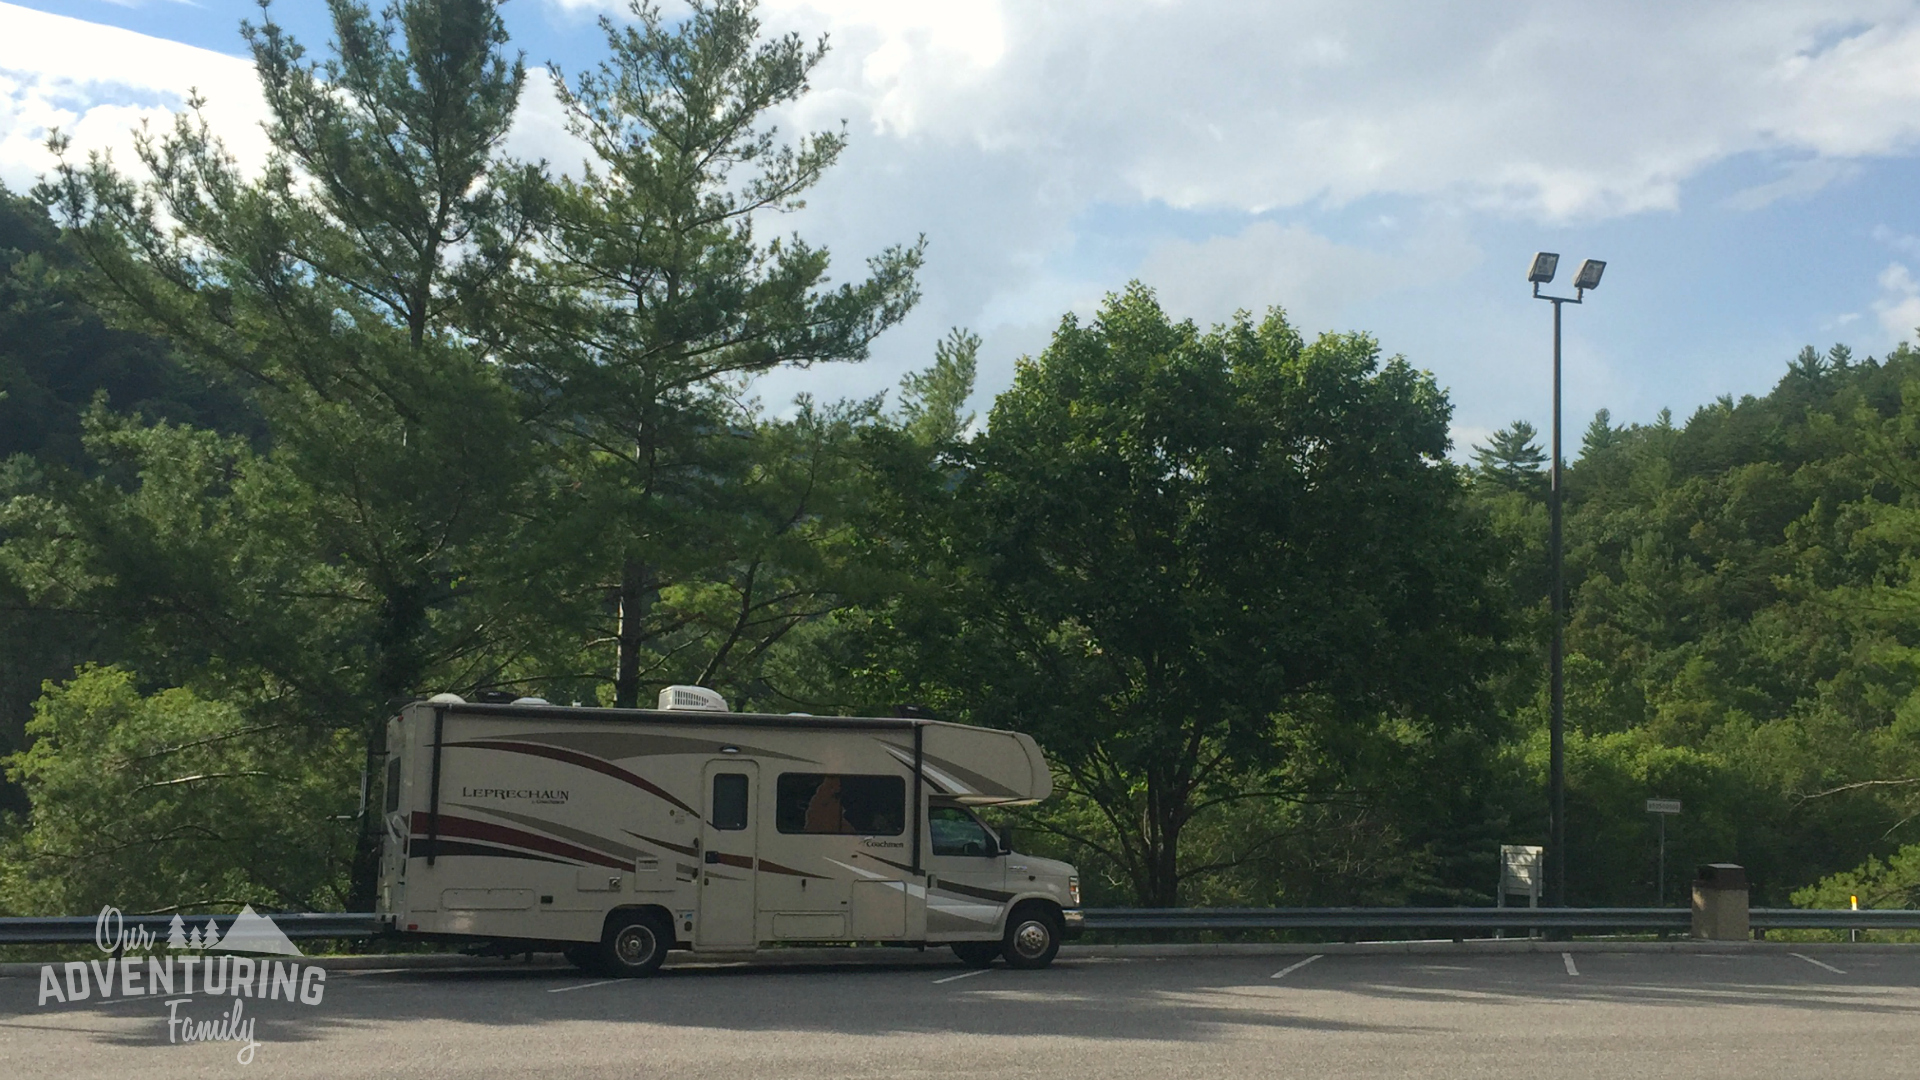 We rented our RV through RVShare and Outdoorsy this year and learned a lot. Here's 16 tips to a successful RV renting experience if you want to give it a try. Find them at ouradventuringfamily.com.